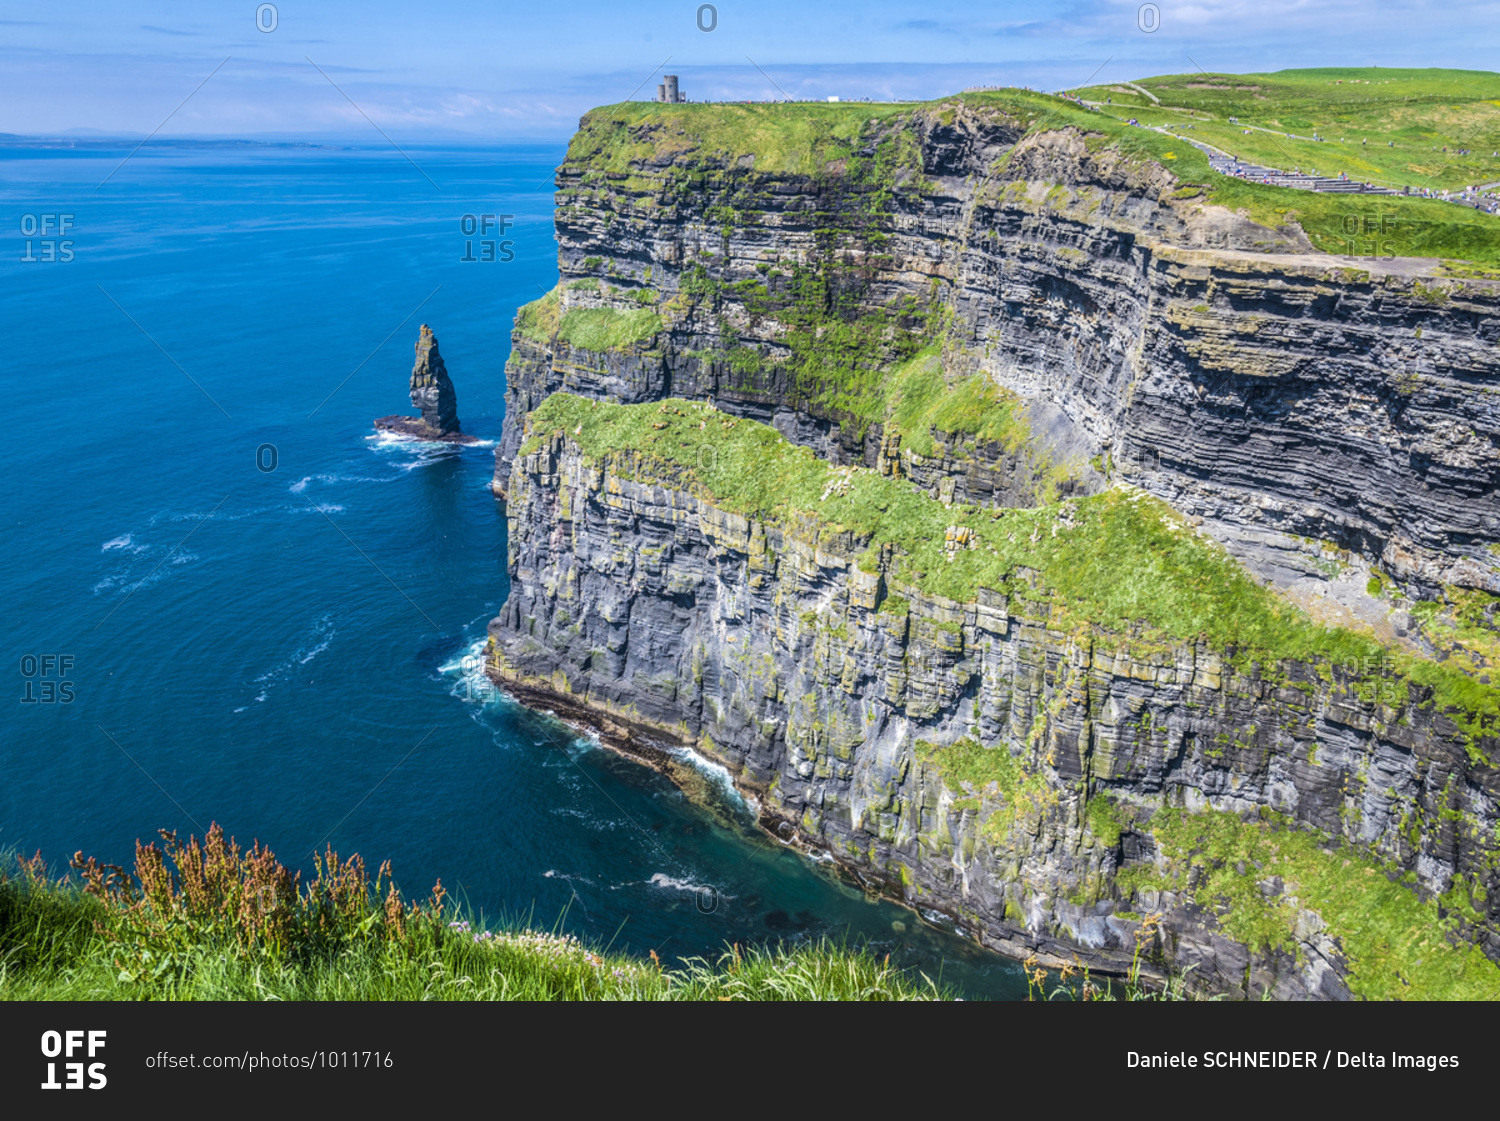 Europe, Republic of Ireland, Clare County, Burren and Cliffs of Moher Geopark (UNESCO World Heritage), North cliffs and rocky outcrop caused by sea erosion, seen from the South cliffs